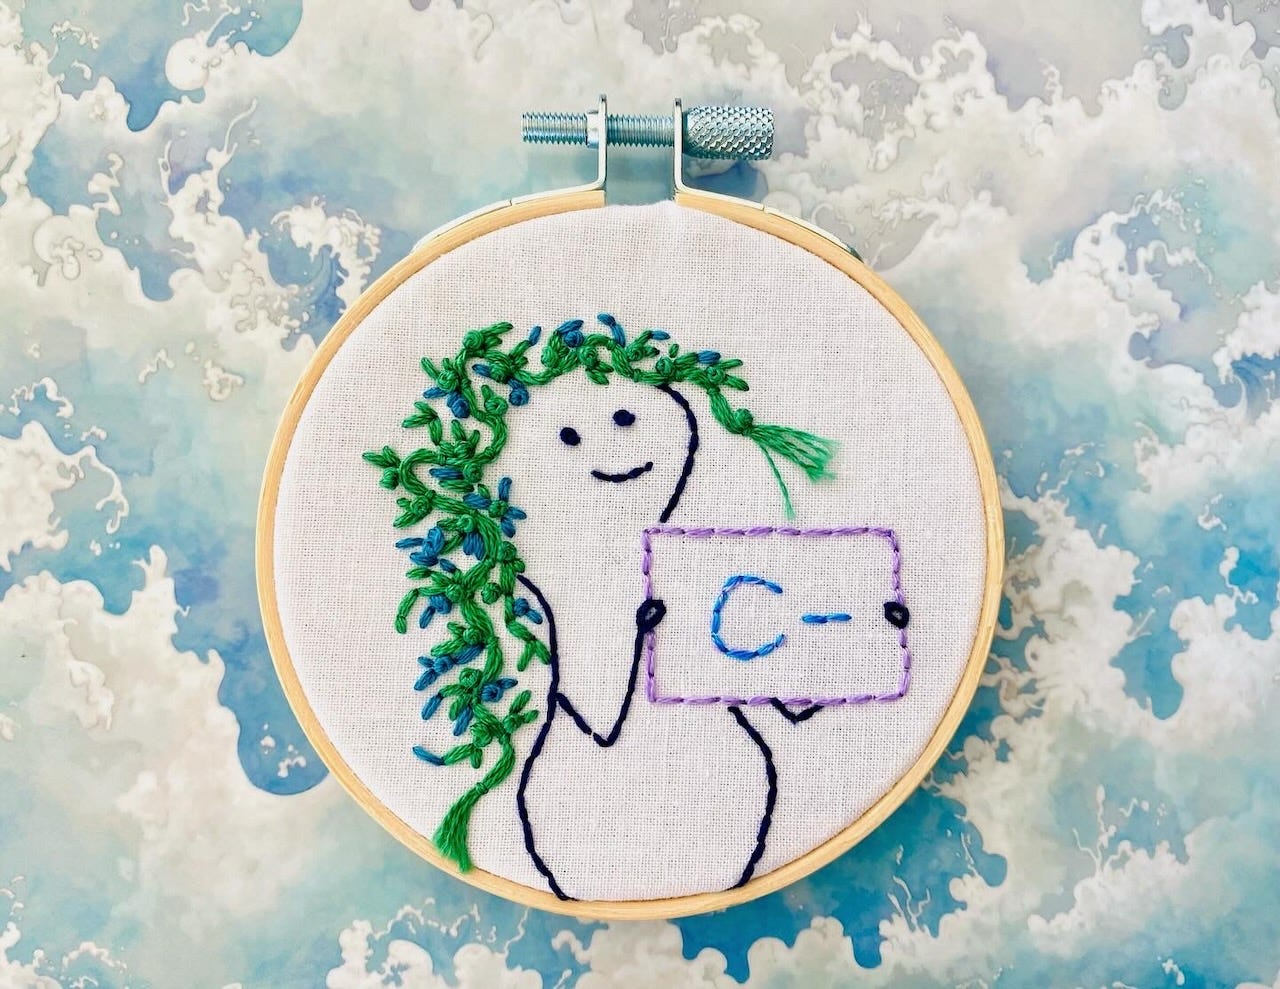 Miniature embroidery of a peanut-shaped figure with luxurious blue-green seaweed hair holding up a sign that says “C-.:”